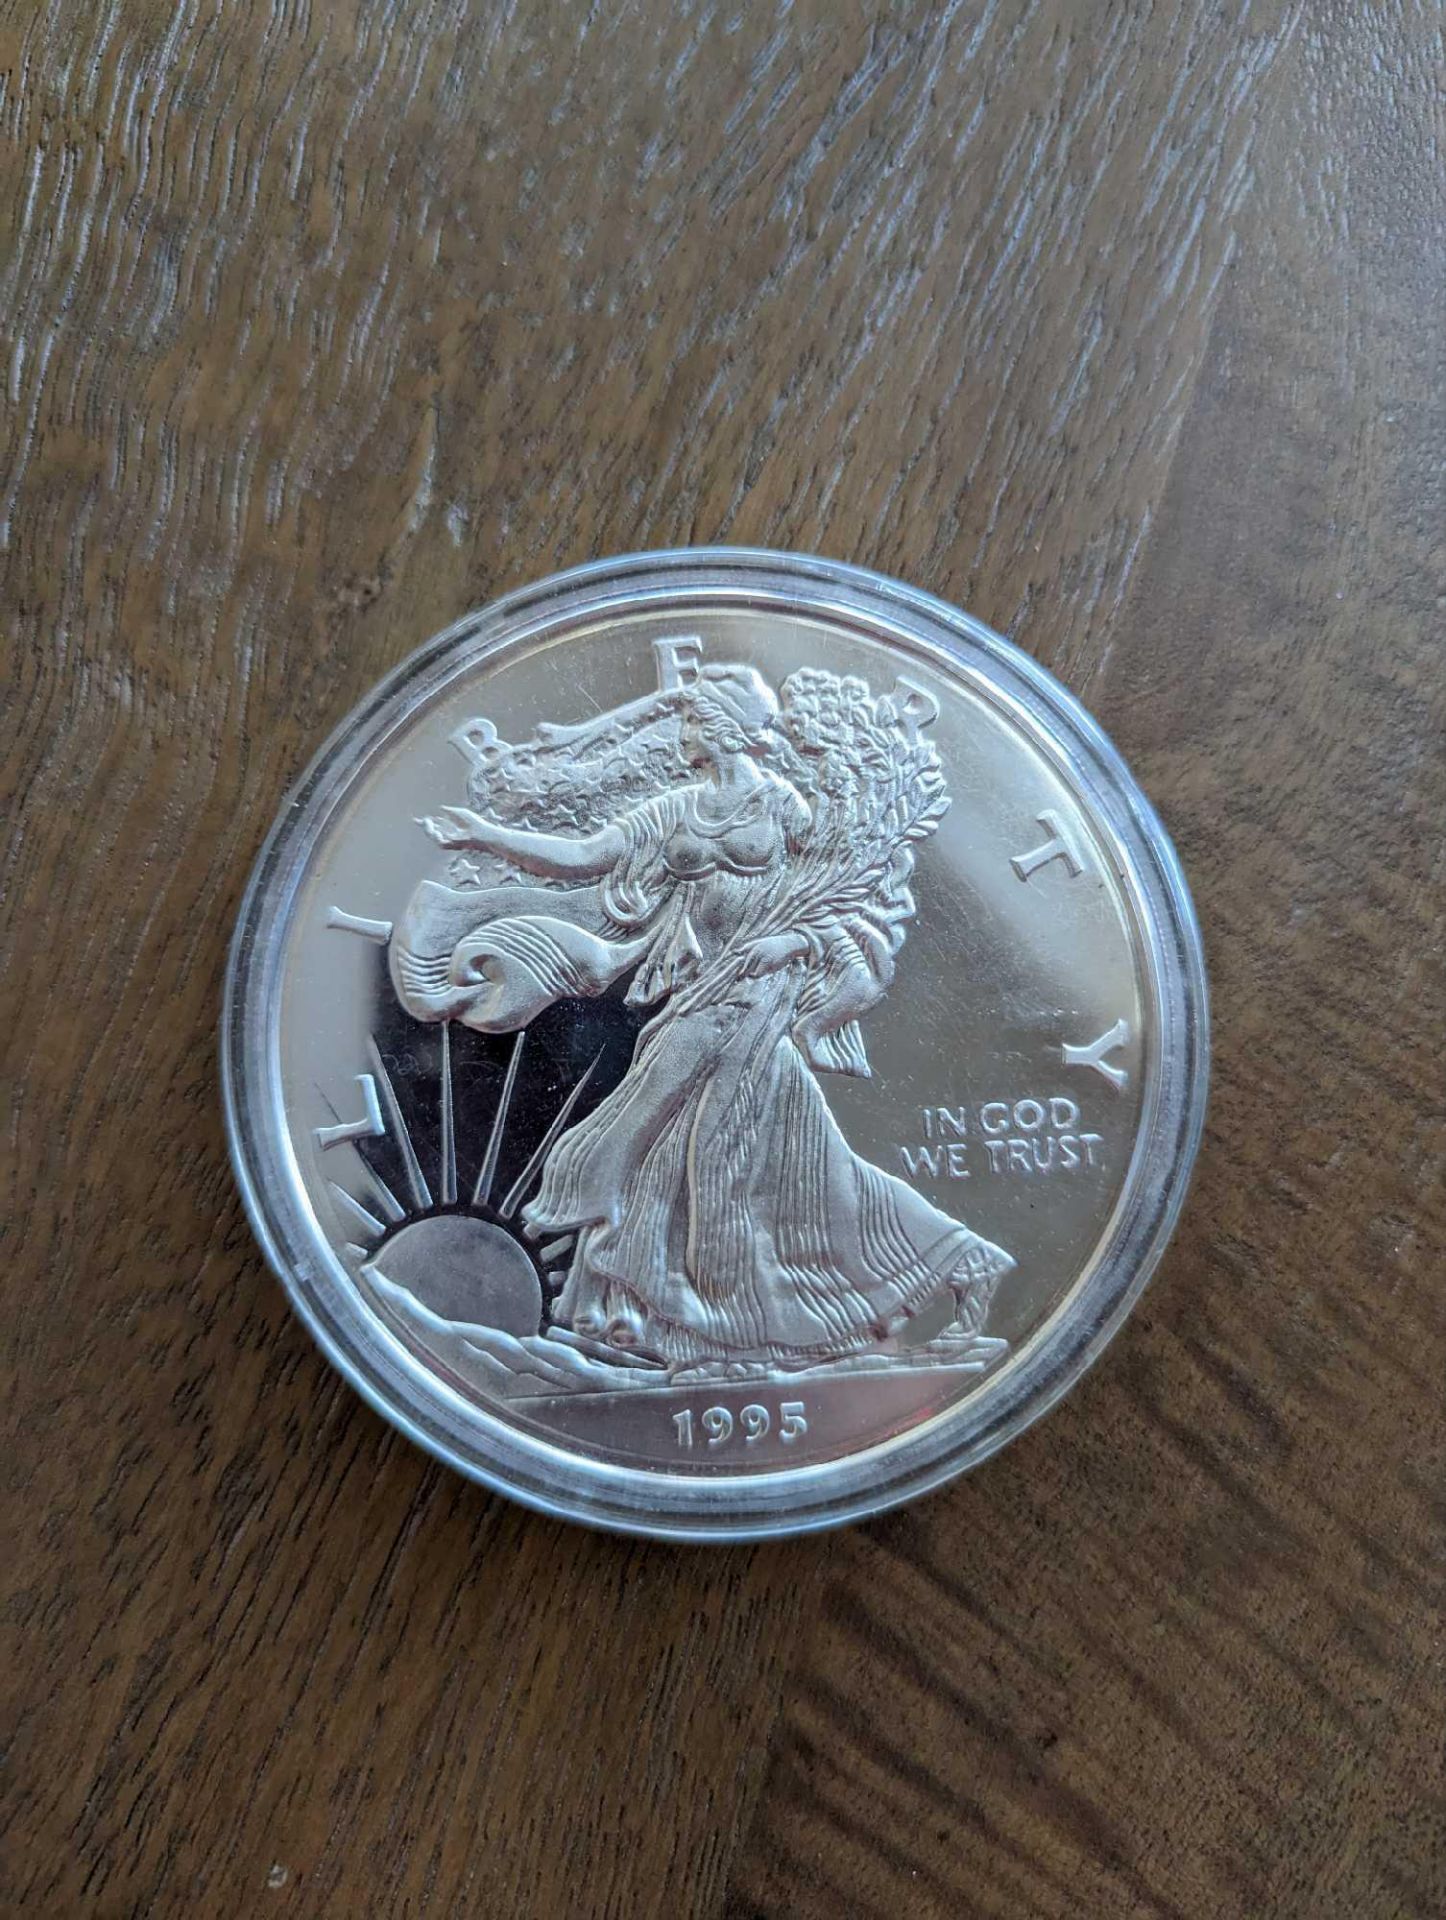 1/2 pound walking liberty silver coin 1995 - Image 2 of 3